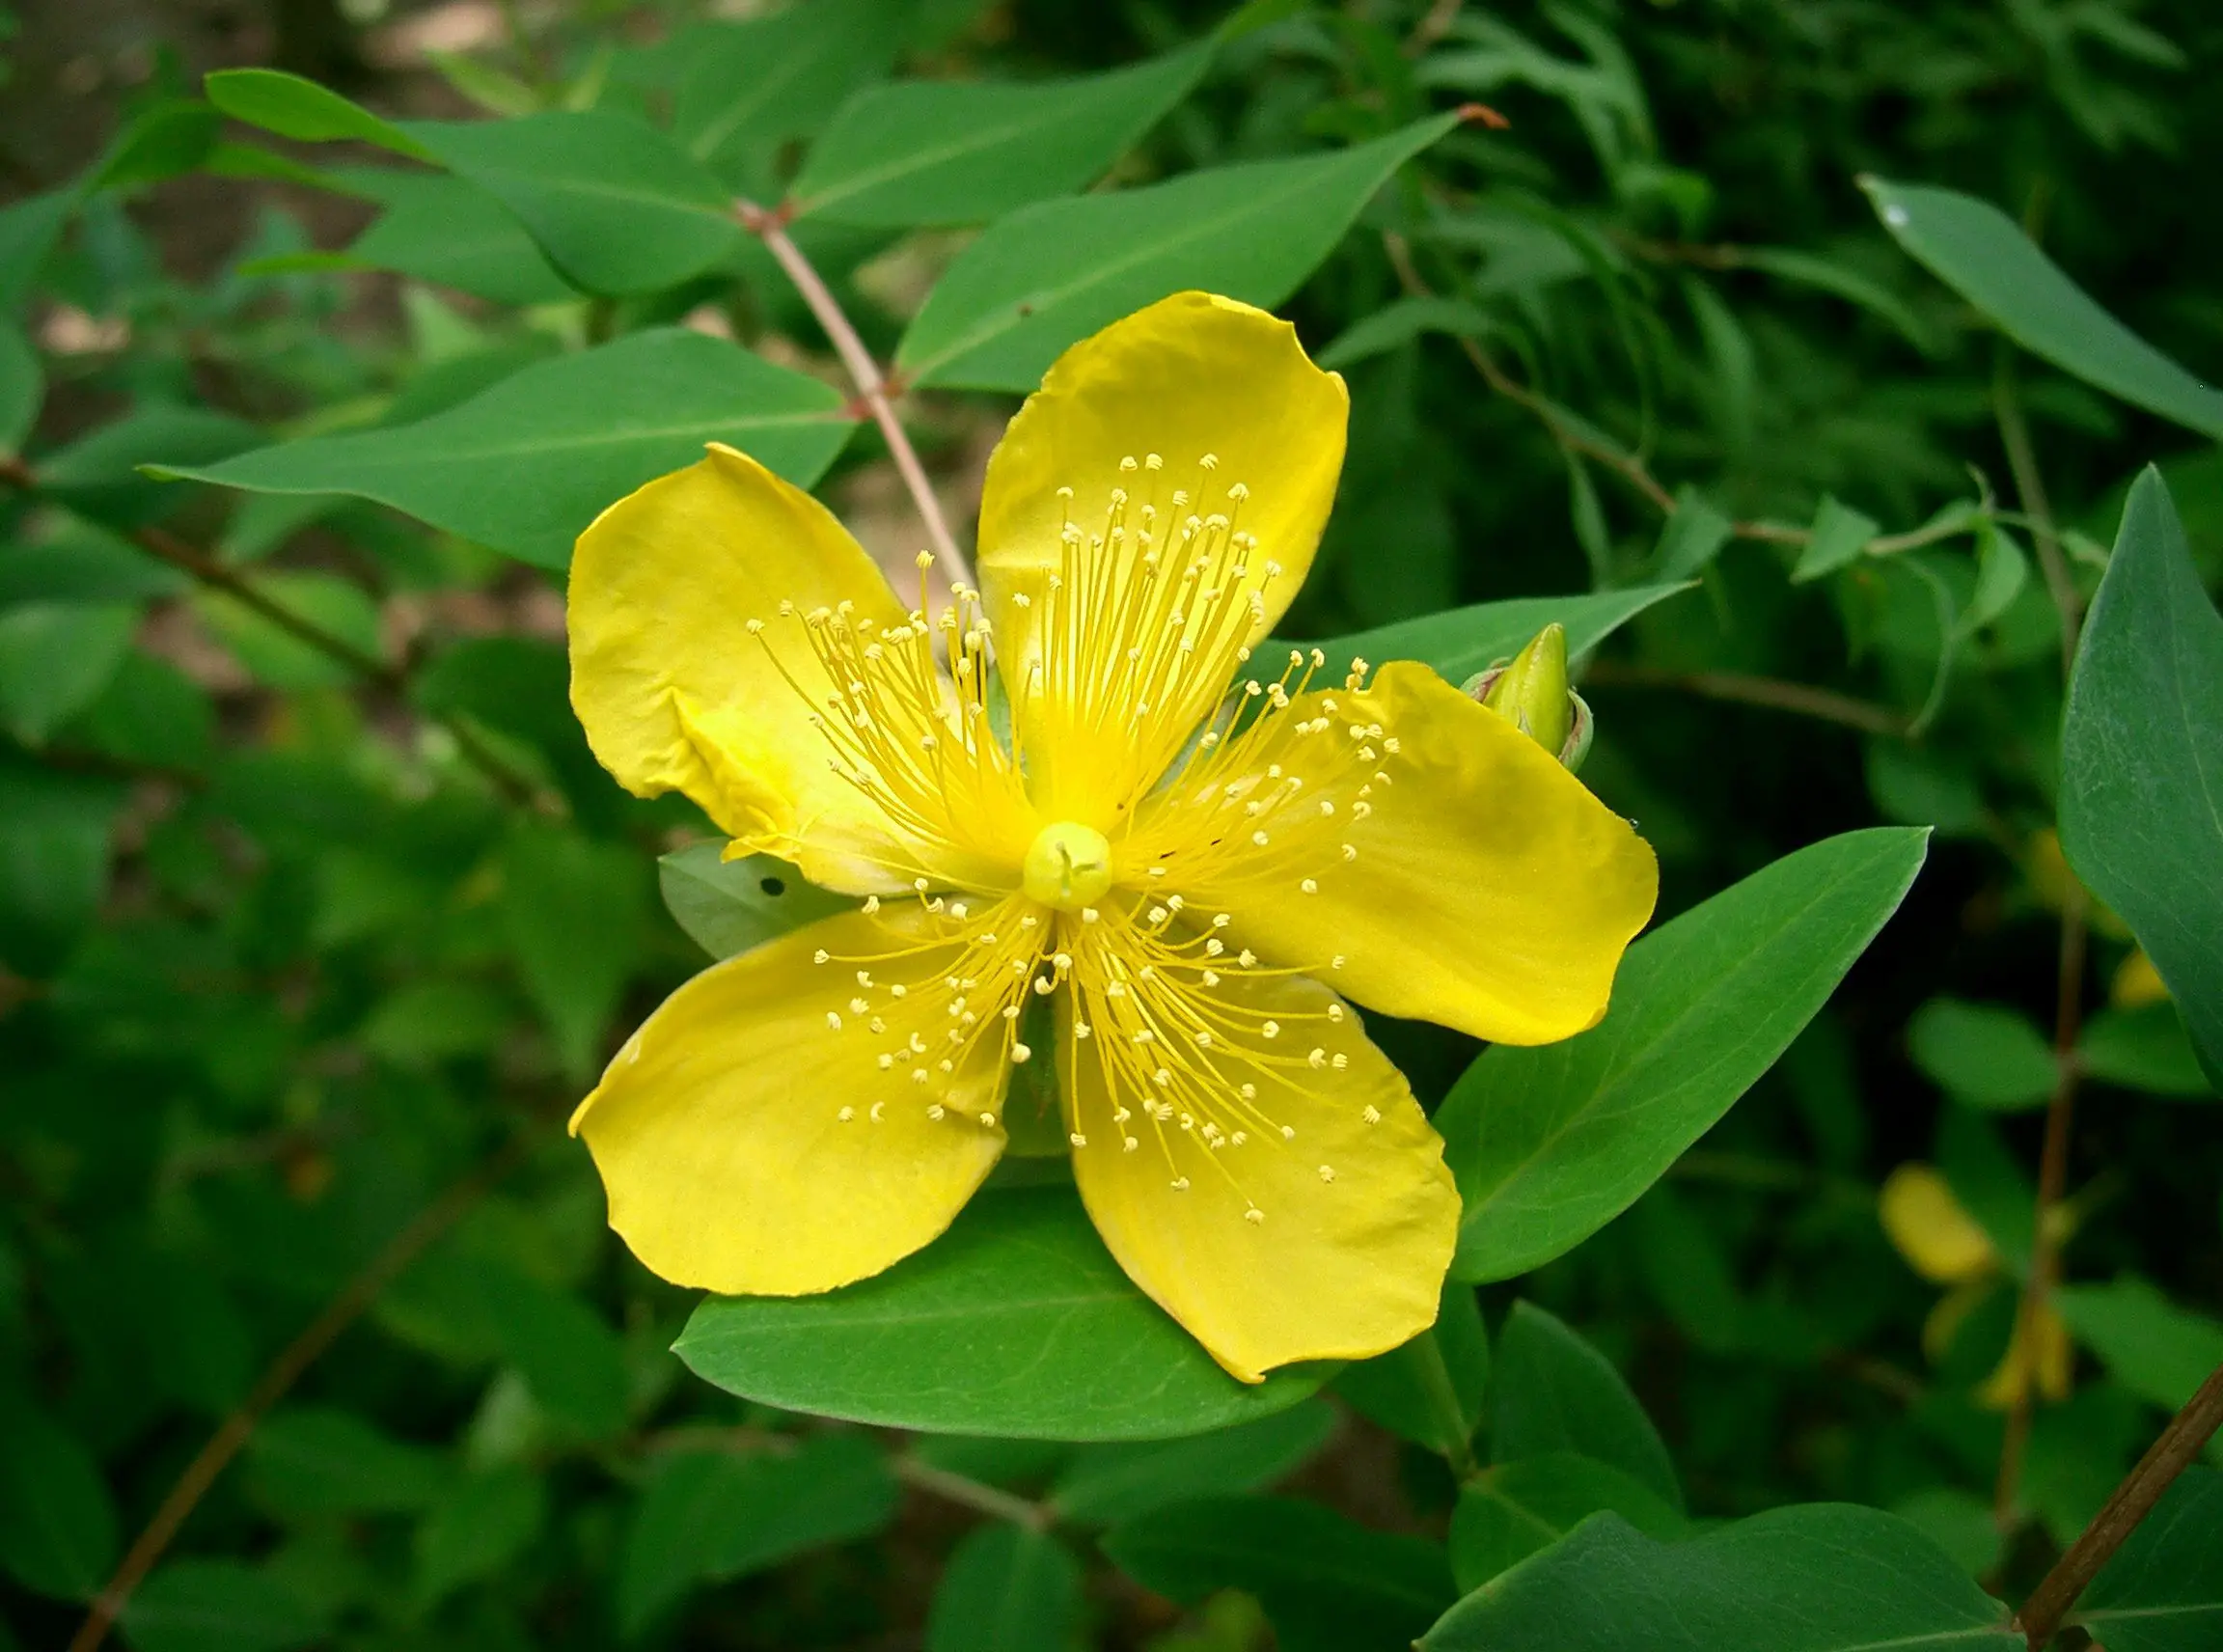 Hypericum-a flower with unusual medicinal properties